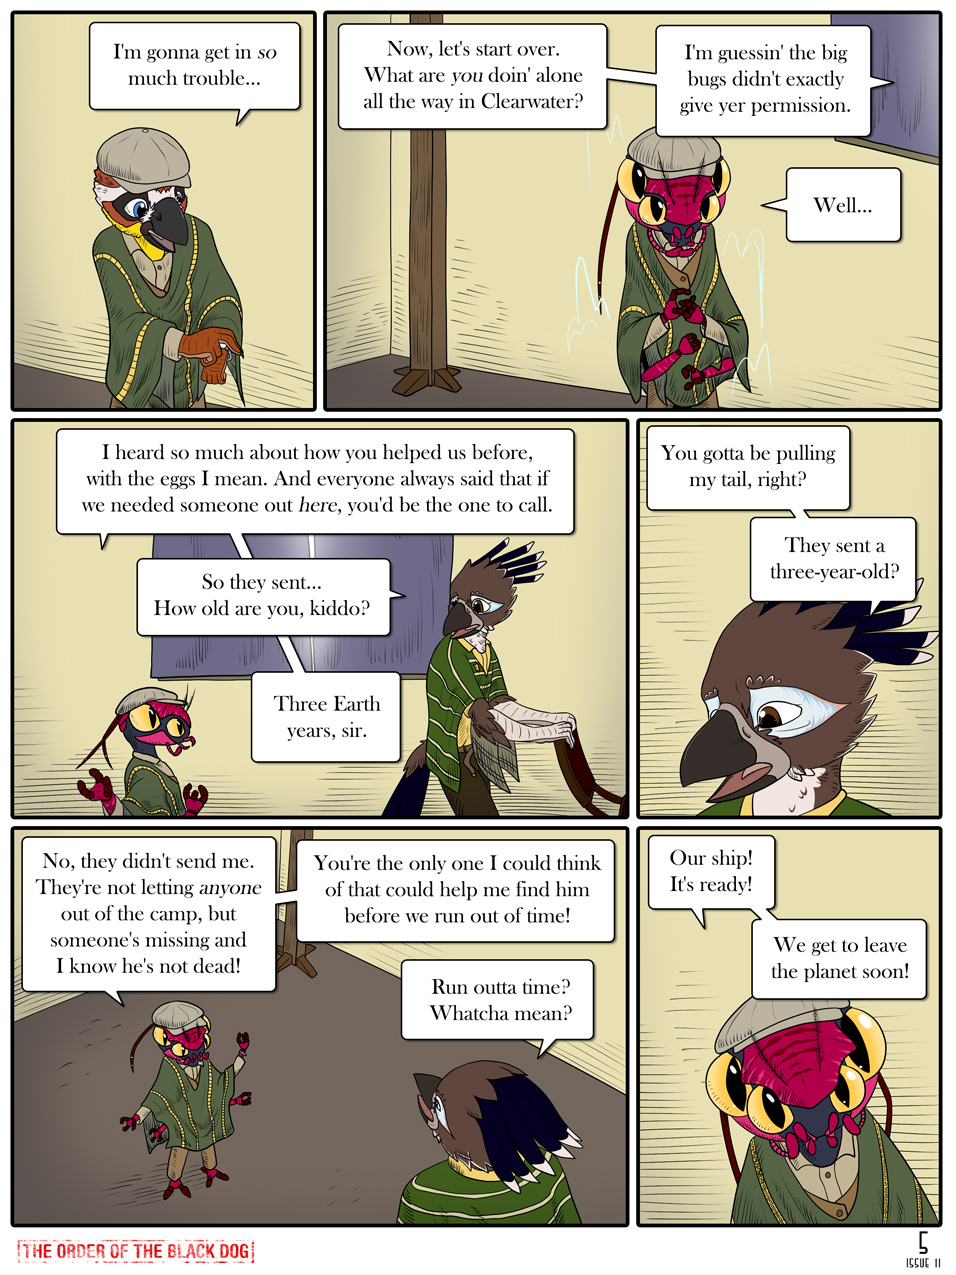 Issue 11, Page 5